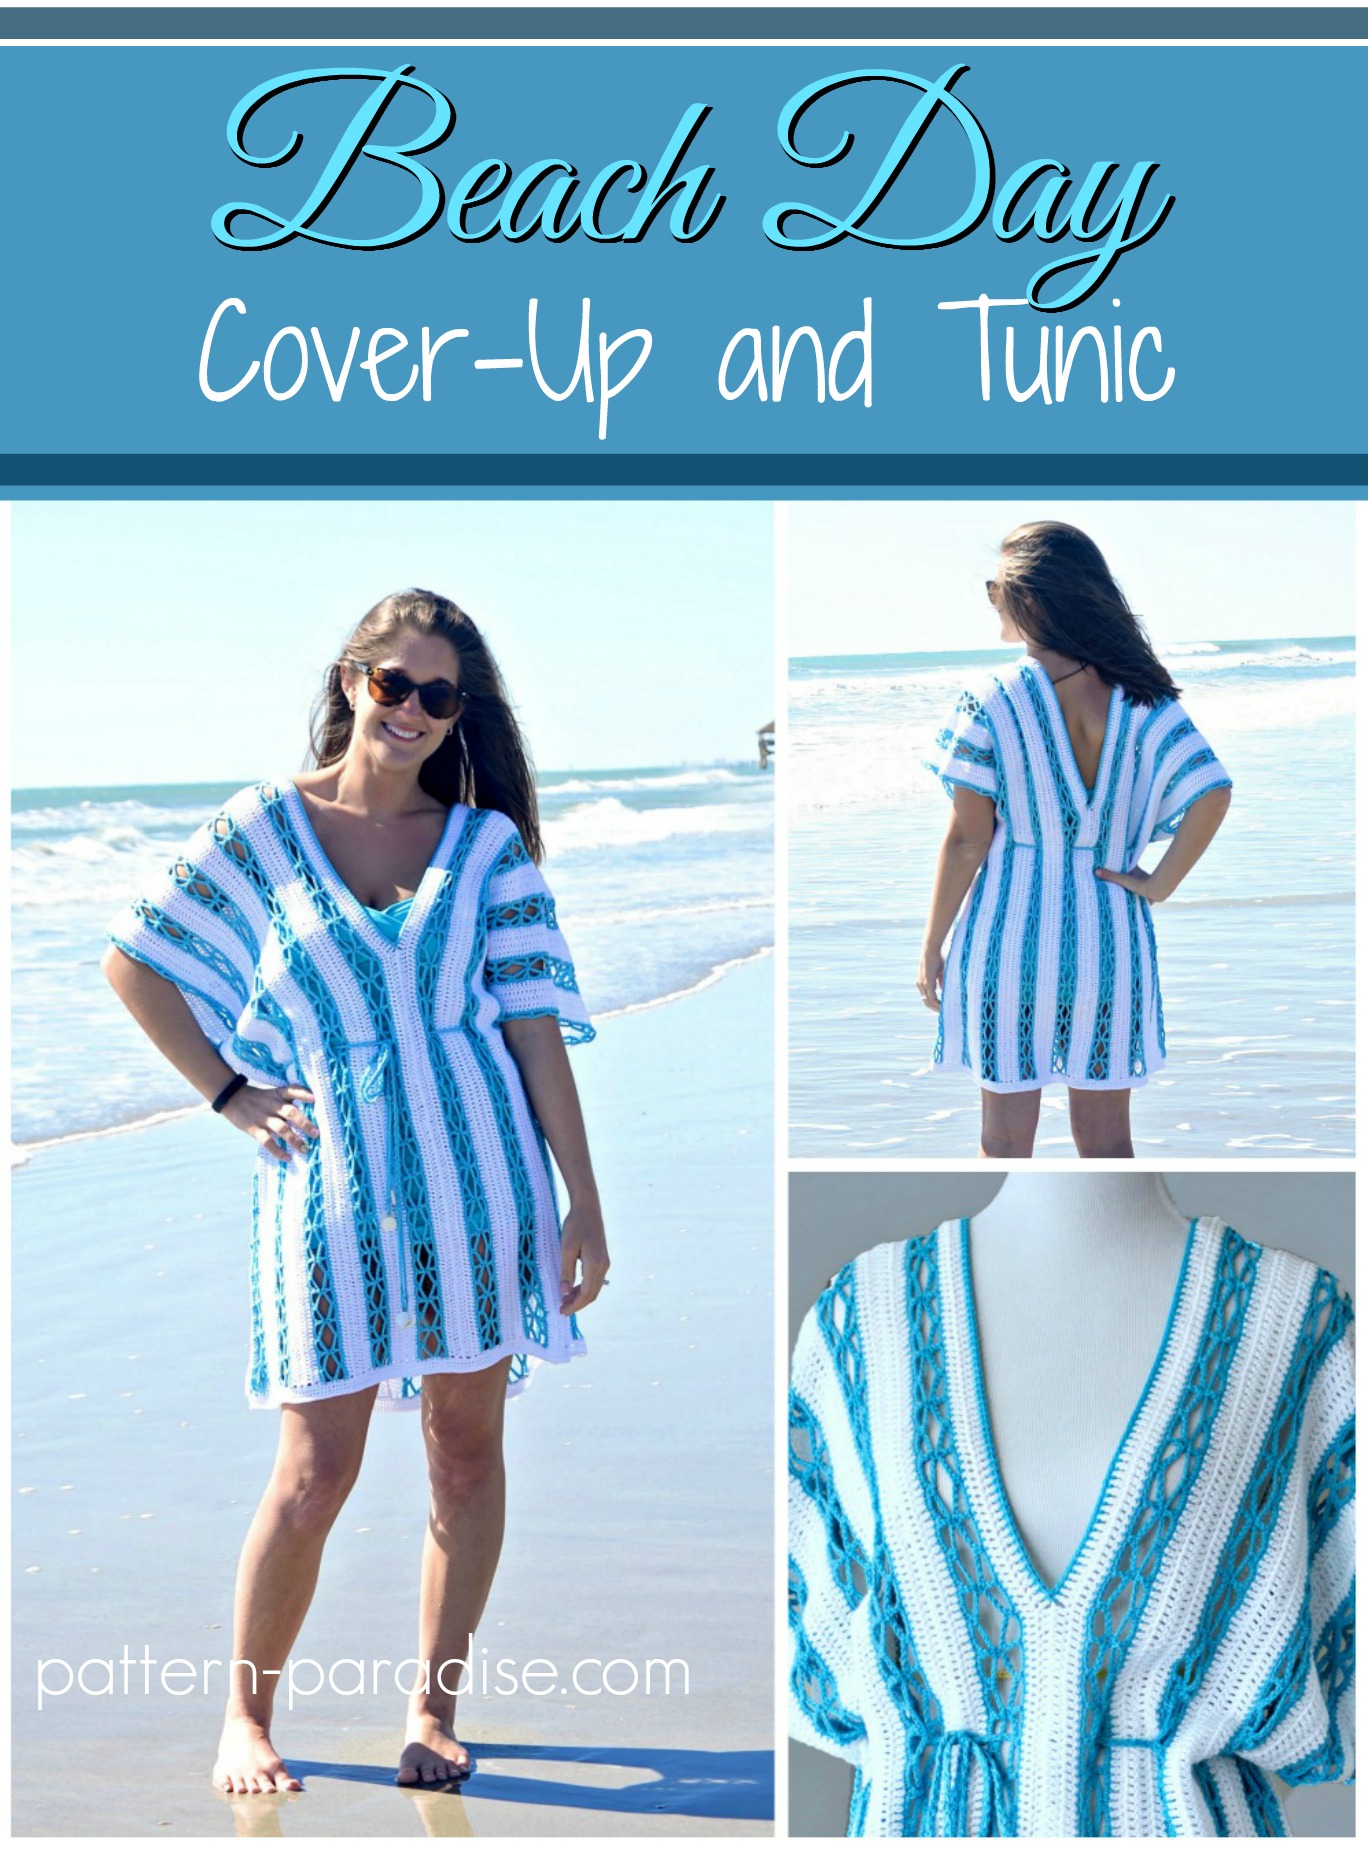 Beach Day Cover-Up Tunic Free Crochet Pattern